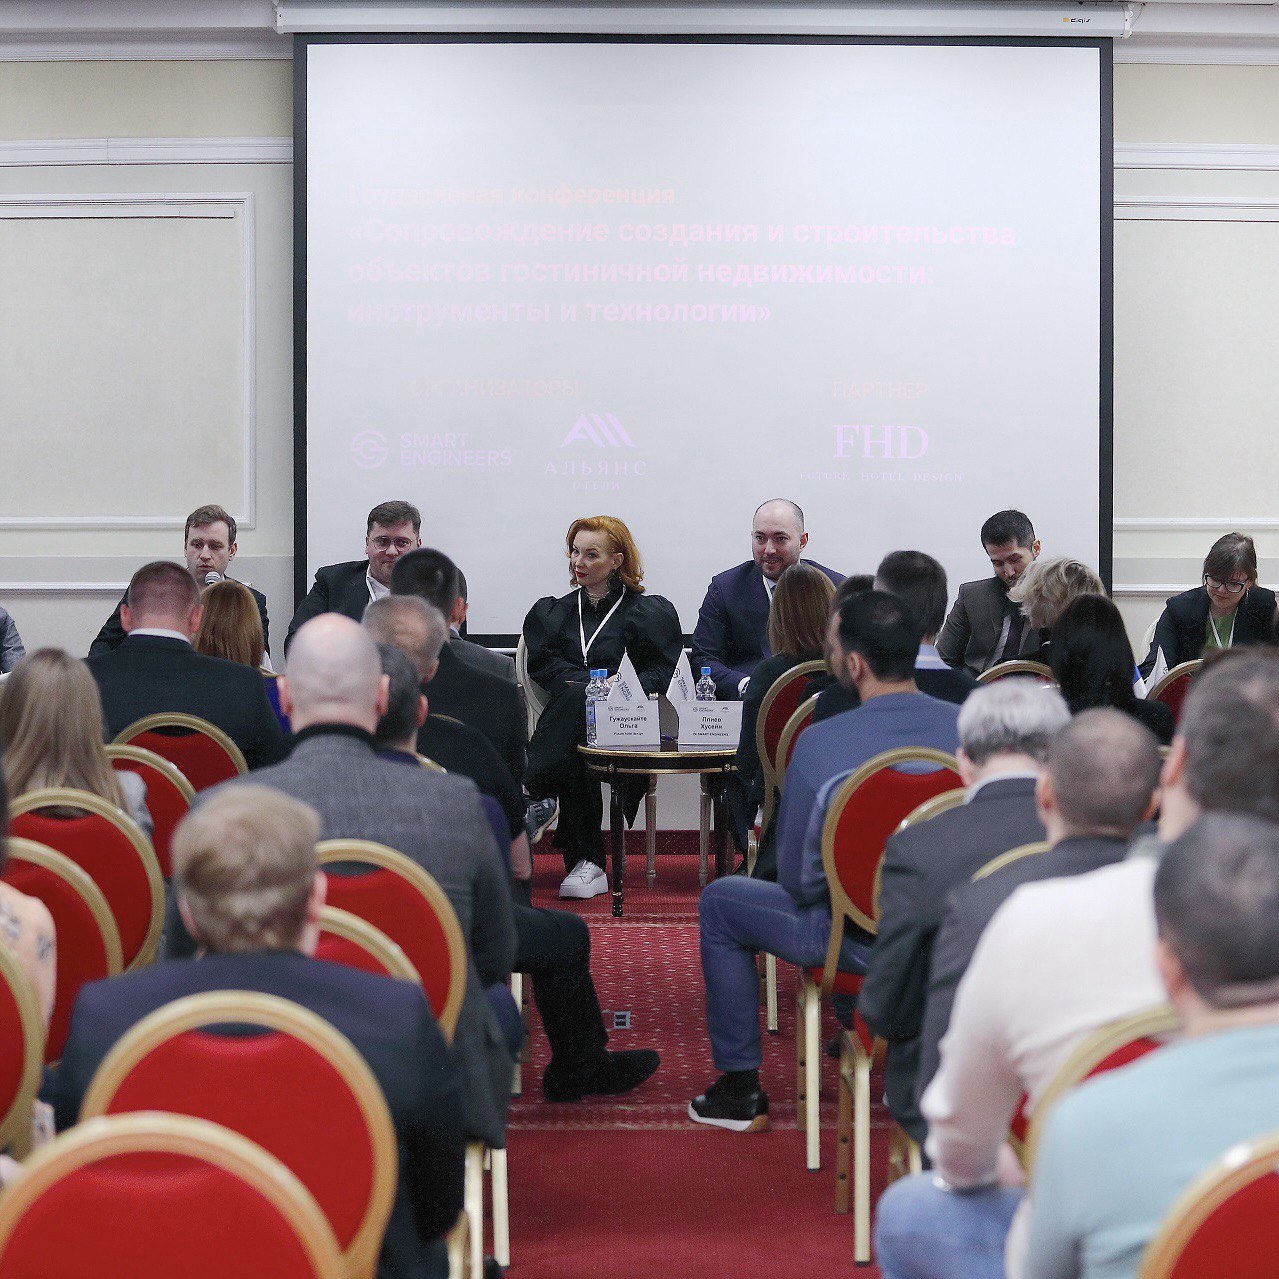 SMART ENGINEERS Group of Companies together with Alliance Hotel Management Management Company will hold the II industry conference “Support for the design and construction of hotel real estate: tools and technologies”